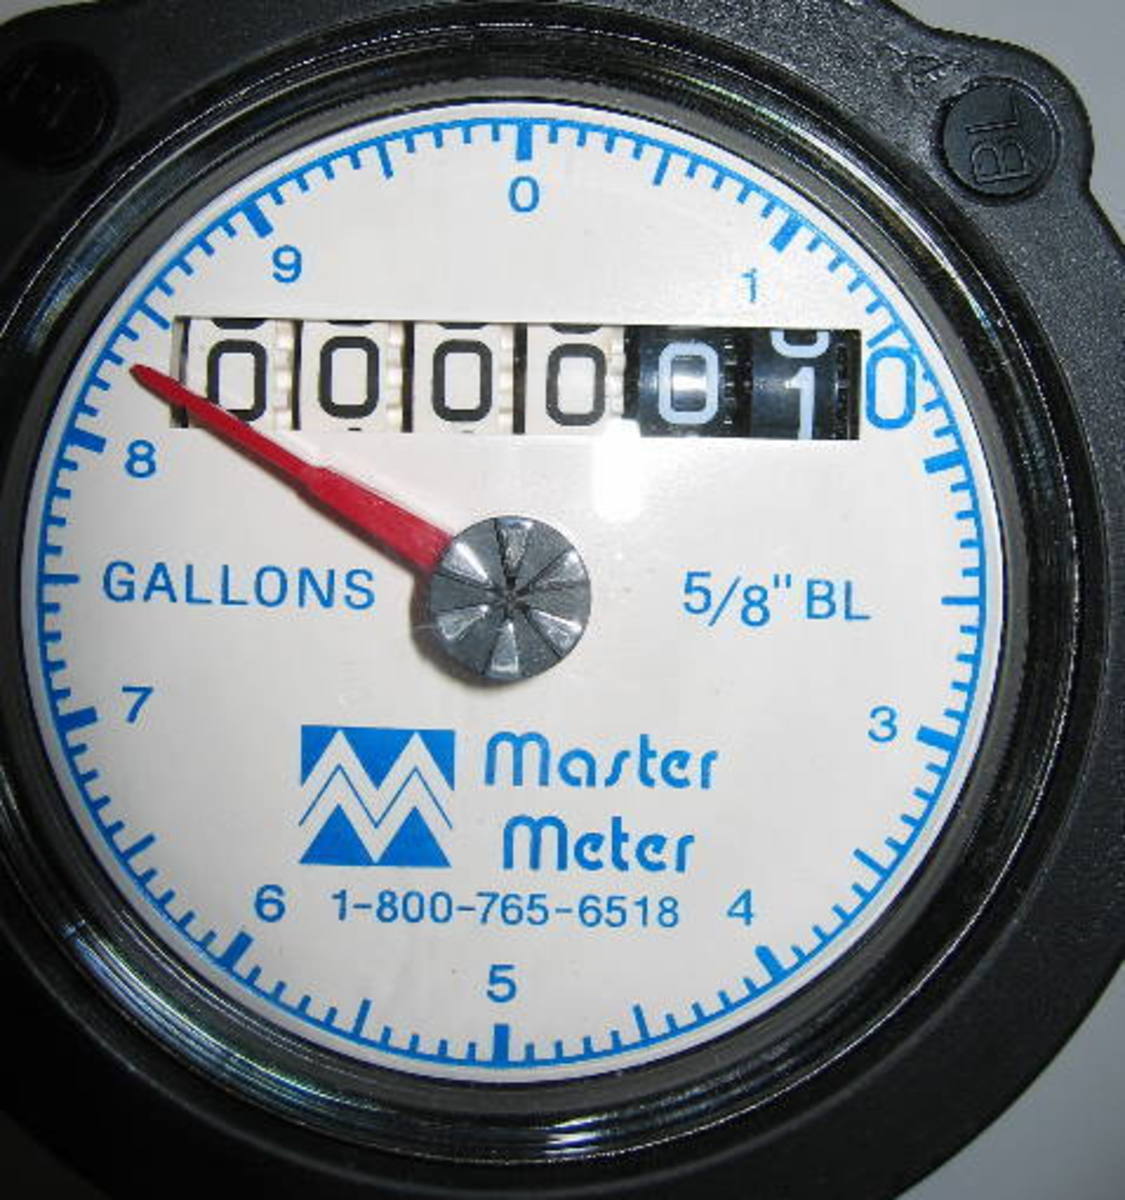 Water flow meters have digital dials and clock dials. Some also have leak meters.